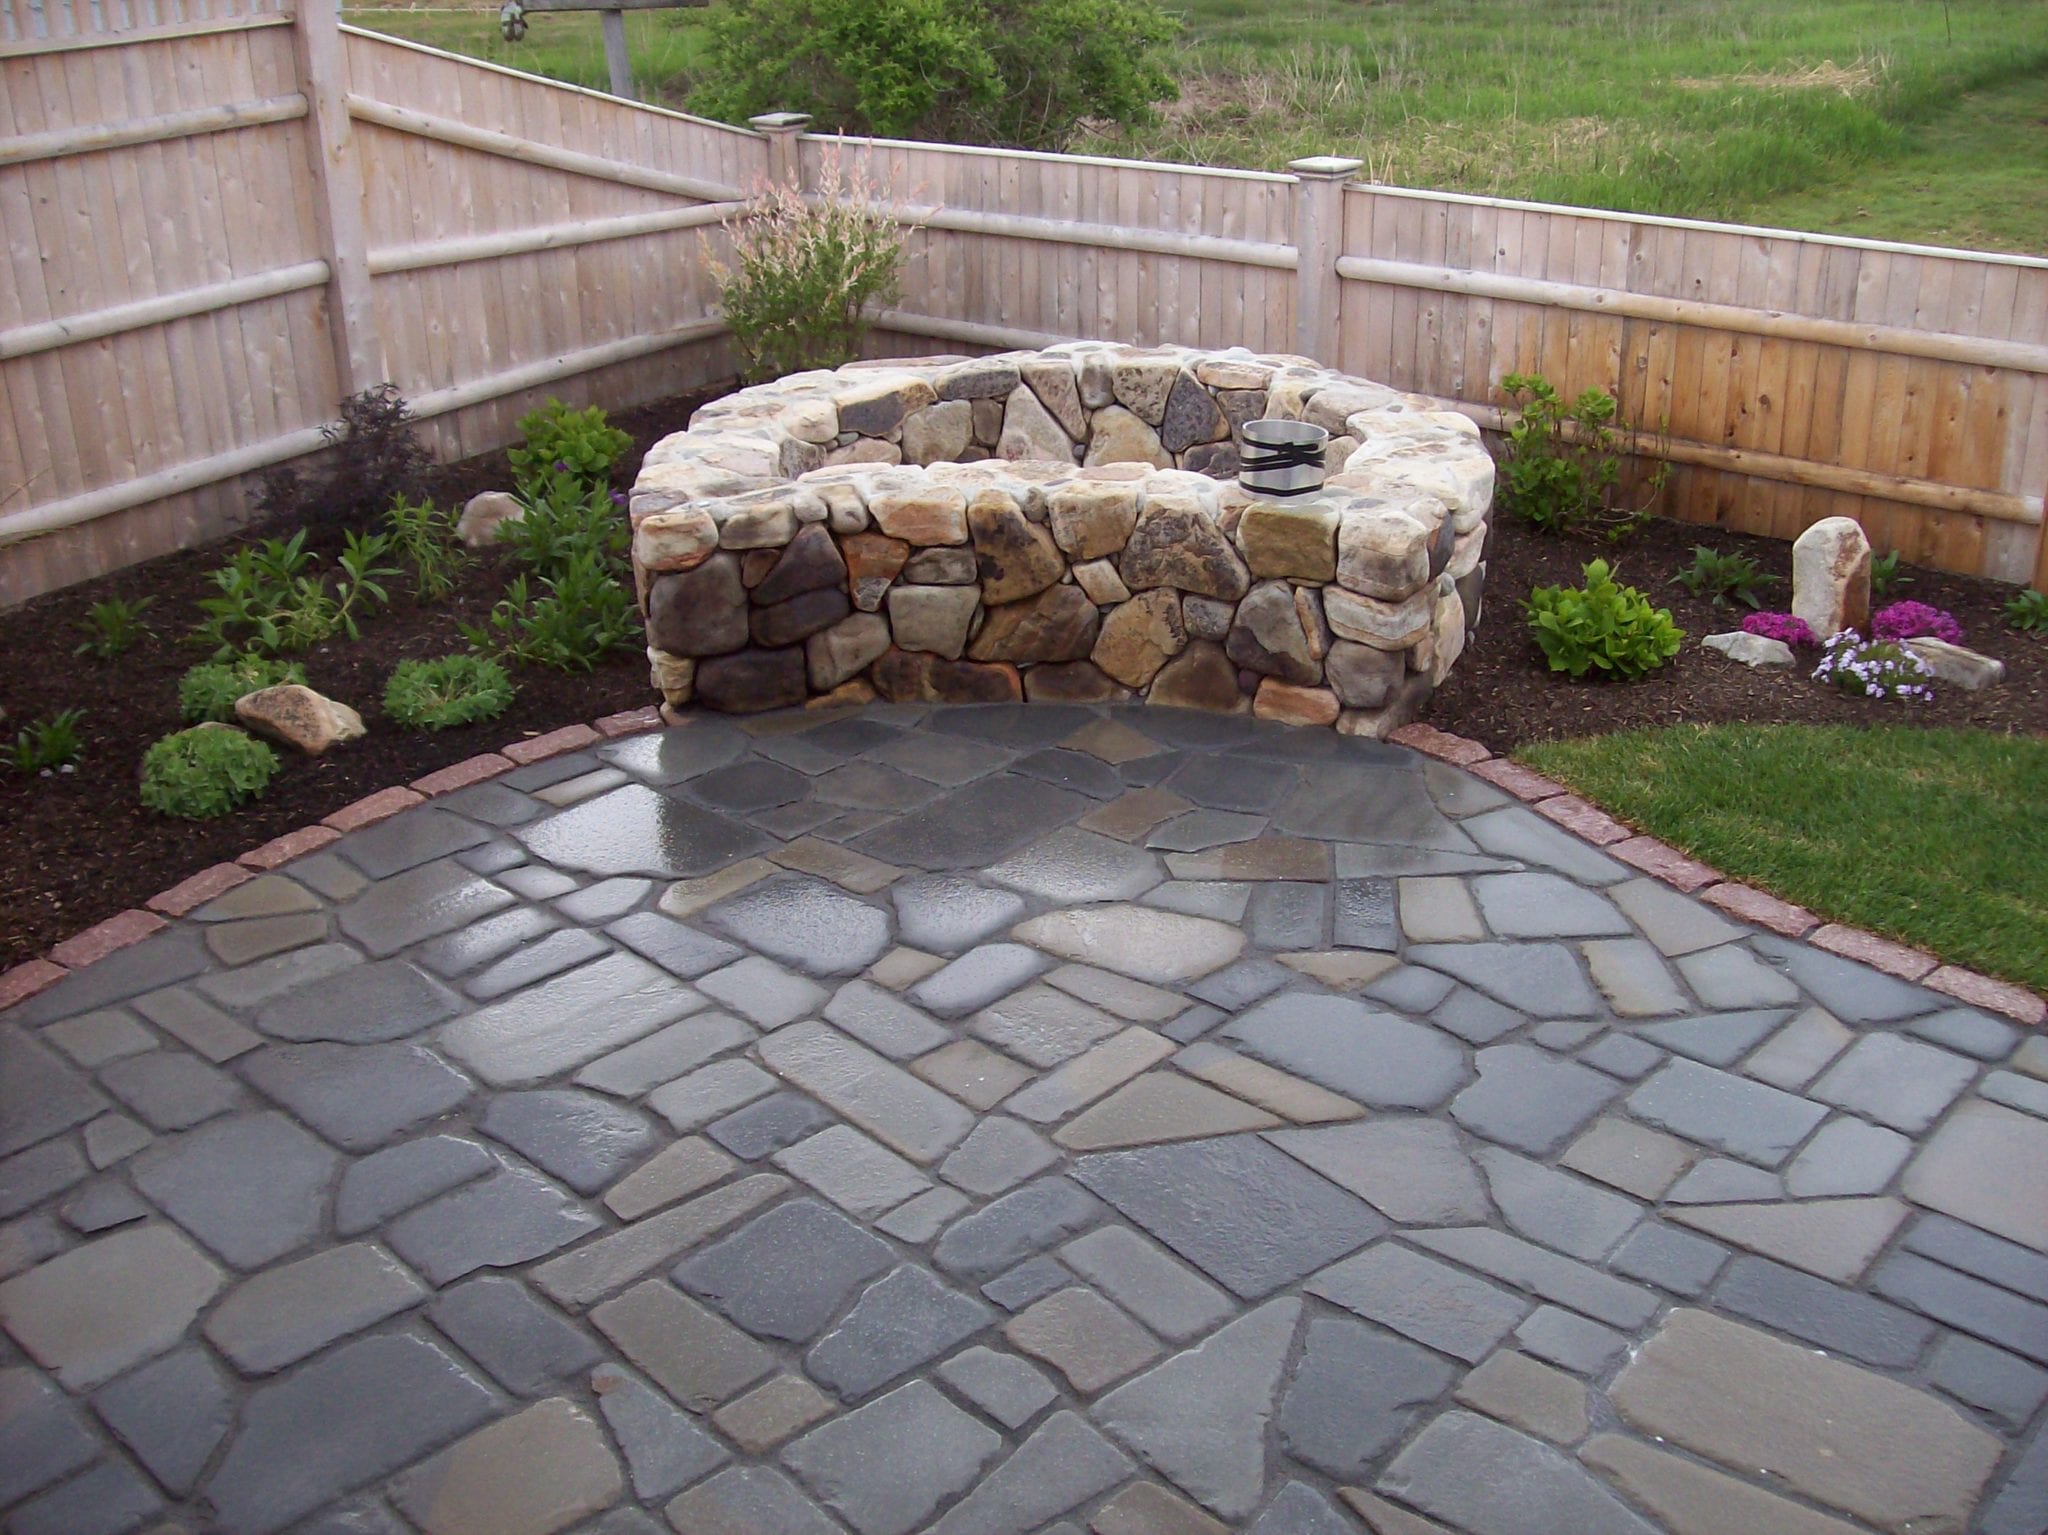 Bluestone patio with natural stone round fireplace surrounded by beautiful landscaping and a wooden fence